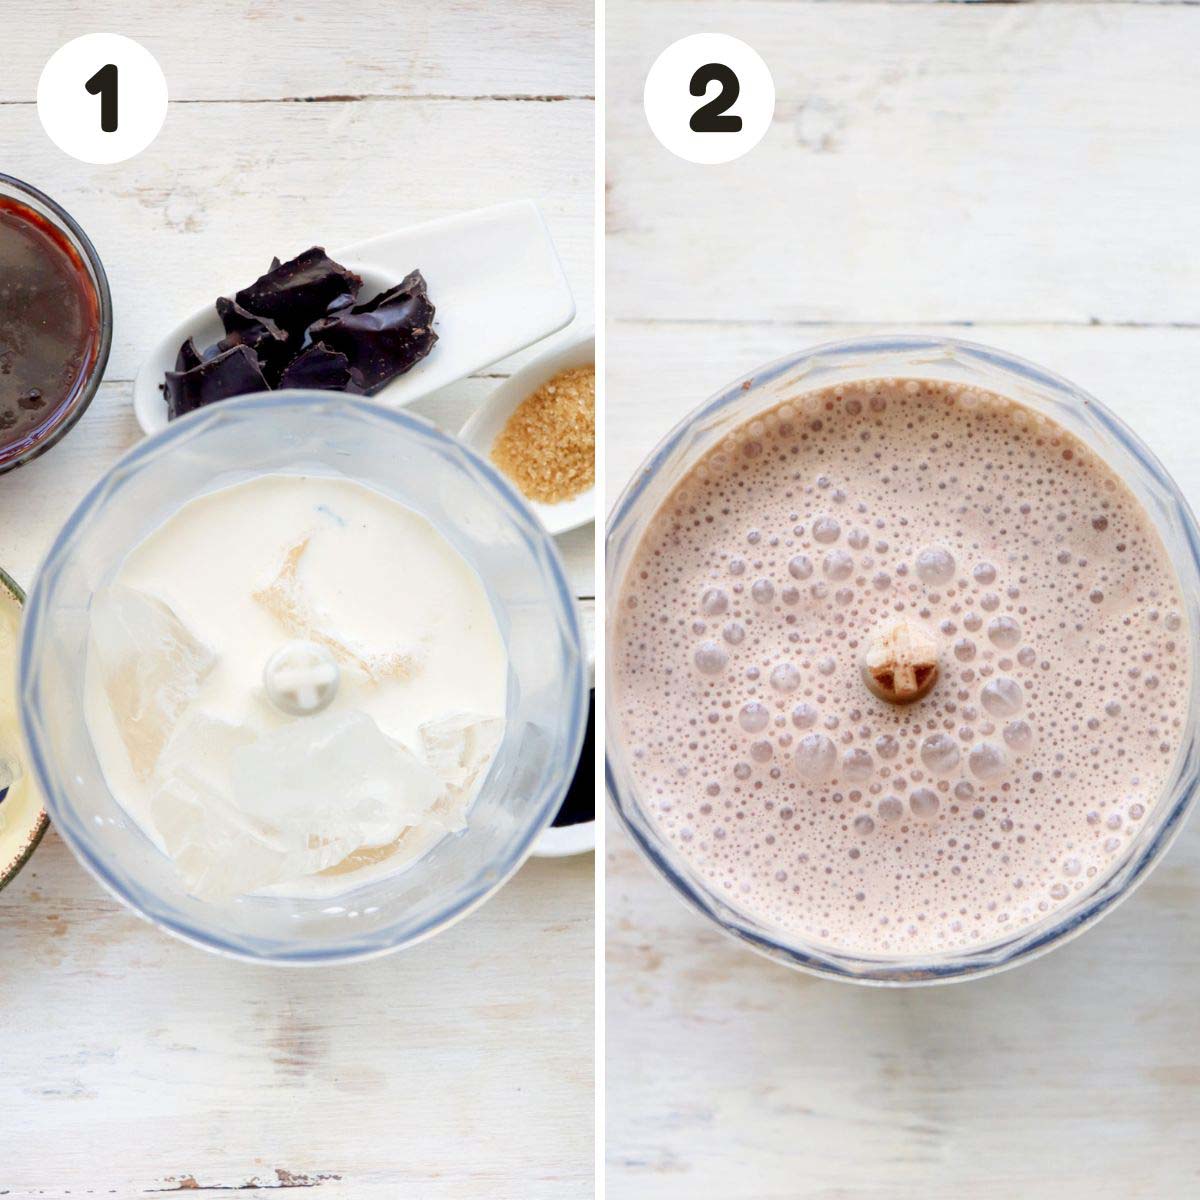 two image process making chocolate chip frappe.